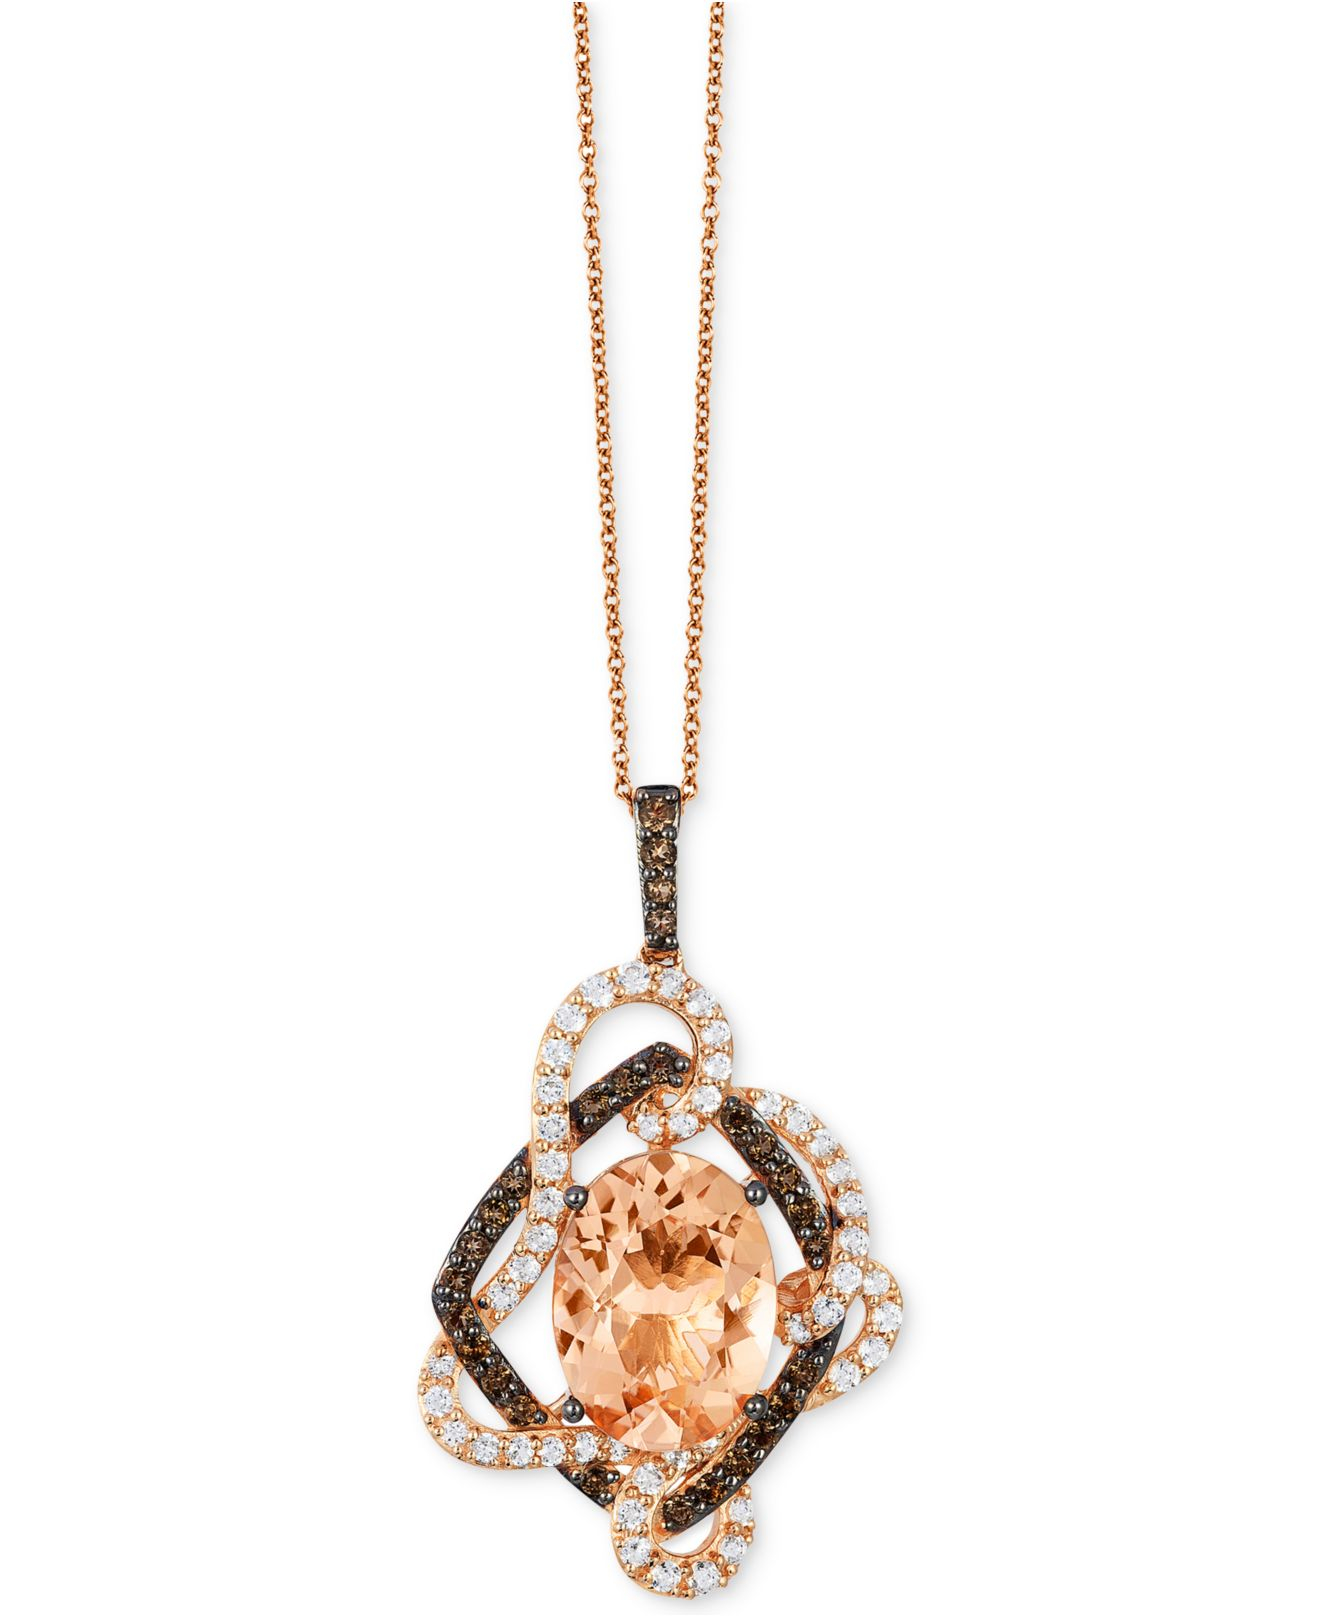 Le Vian Crazies Collection Multistone Pendant Necklace (85/8 Ct. T.w.) In 14k Rose Gold in